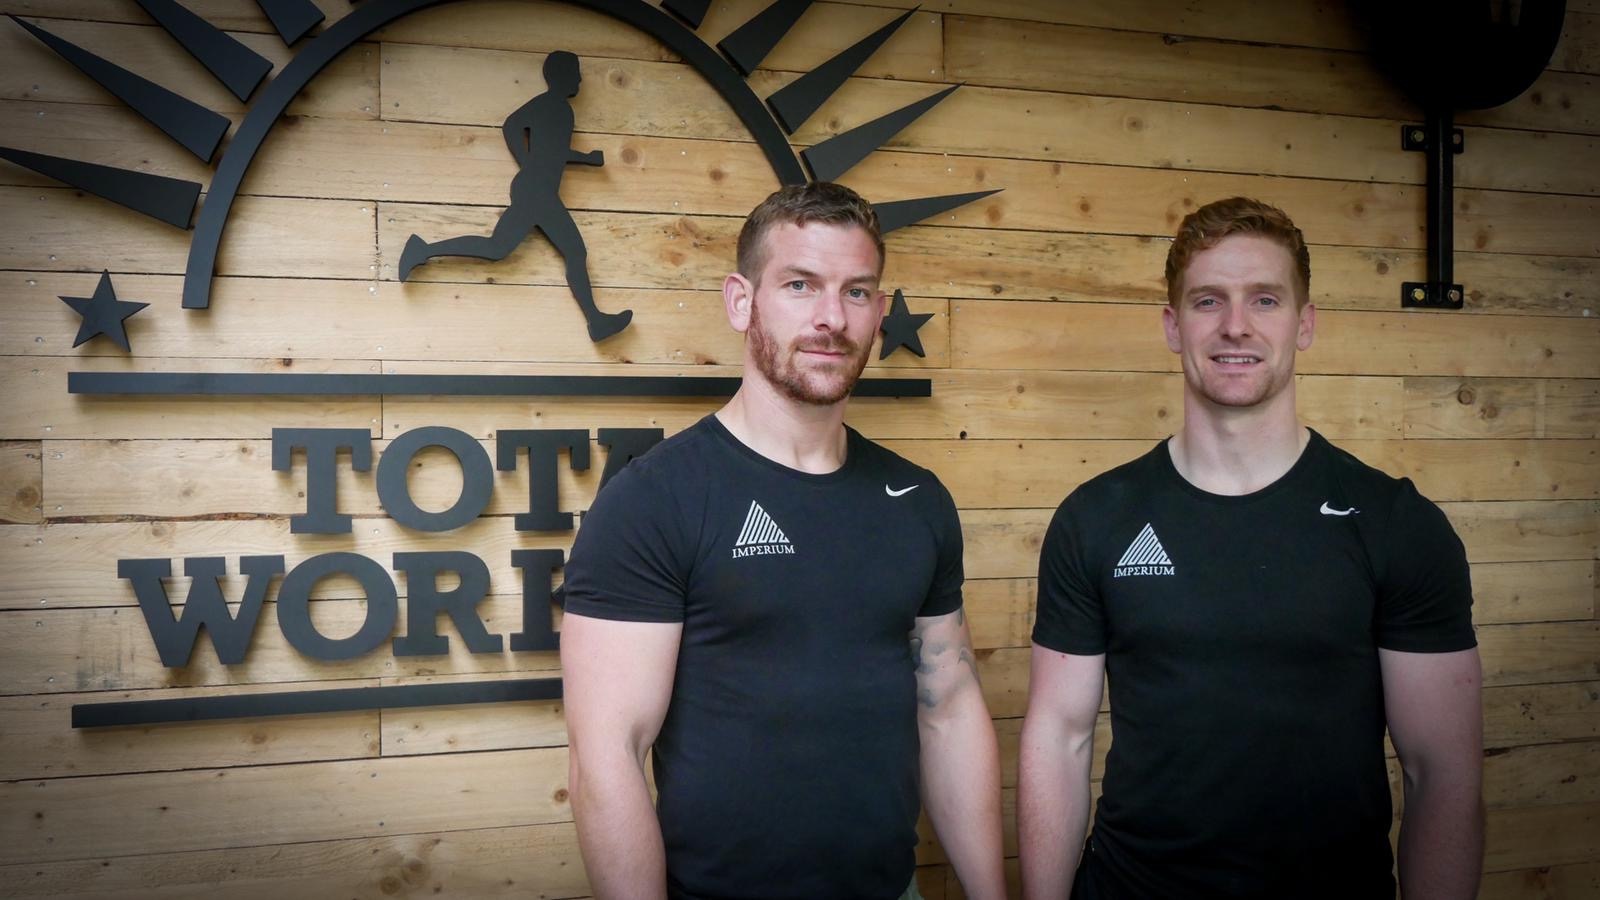 Omagh’s Teague brothers hope to ‘fit’ in at Loughborough Games